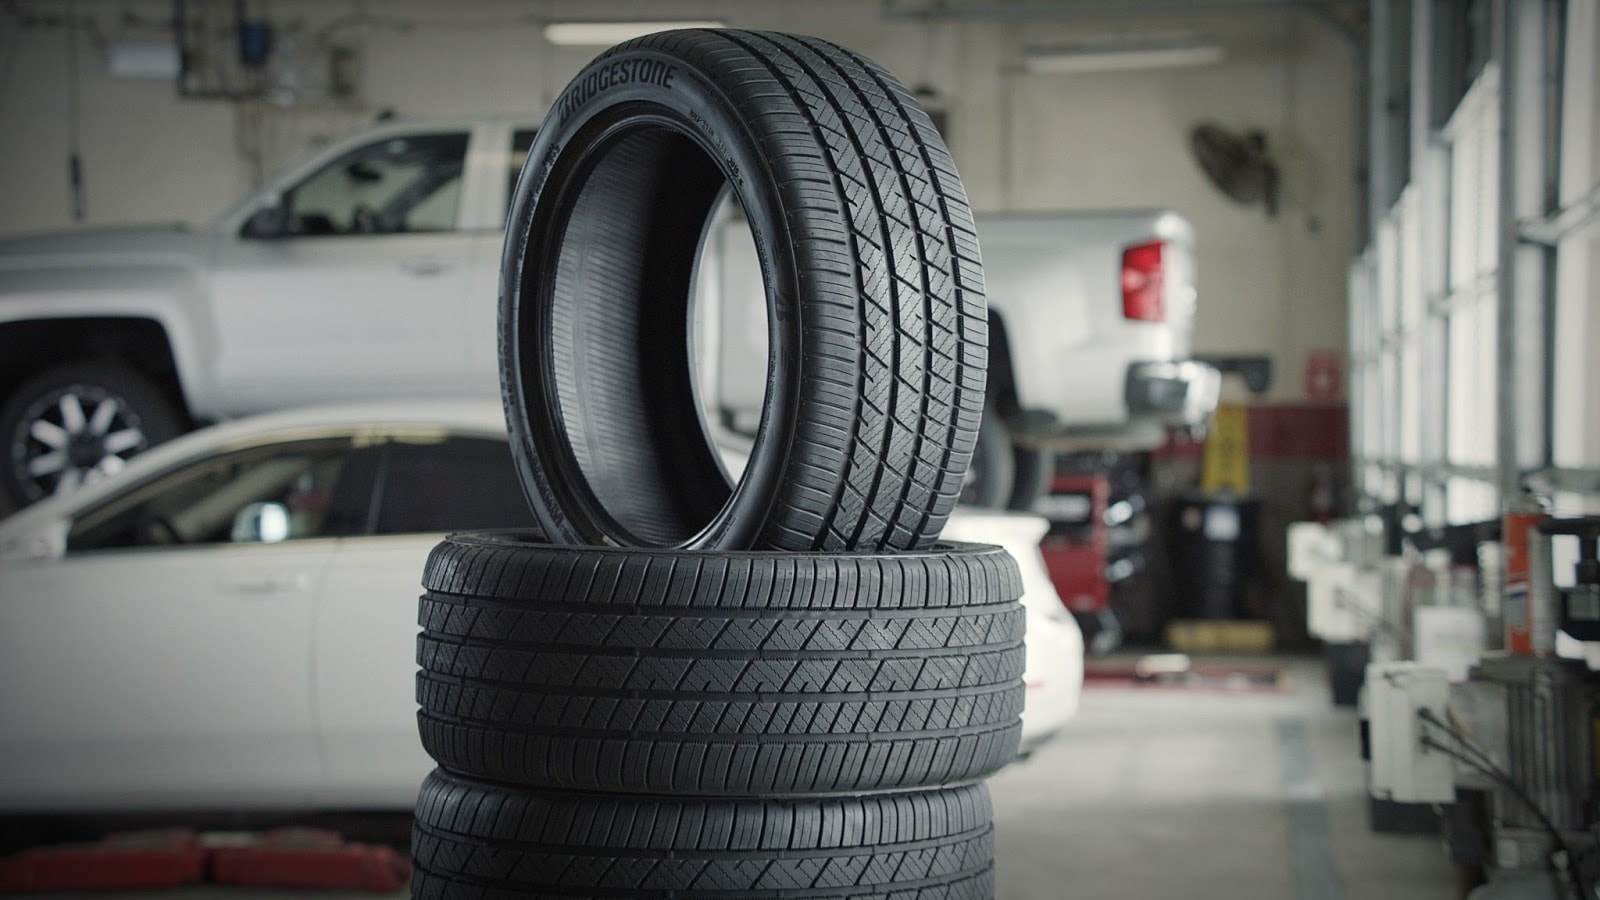 How Much Does Firestone Charge to Mount And Balance Tires